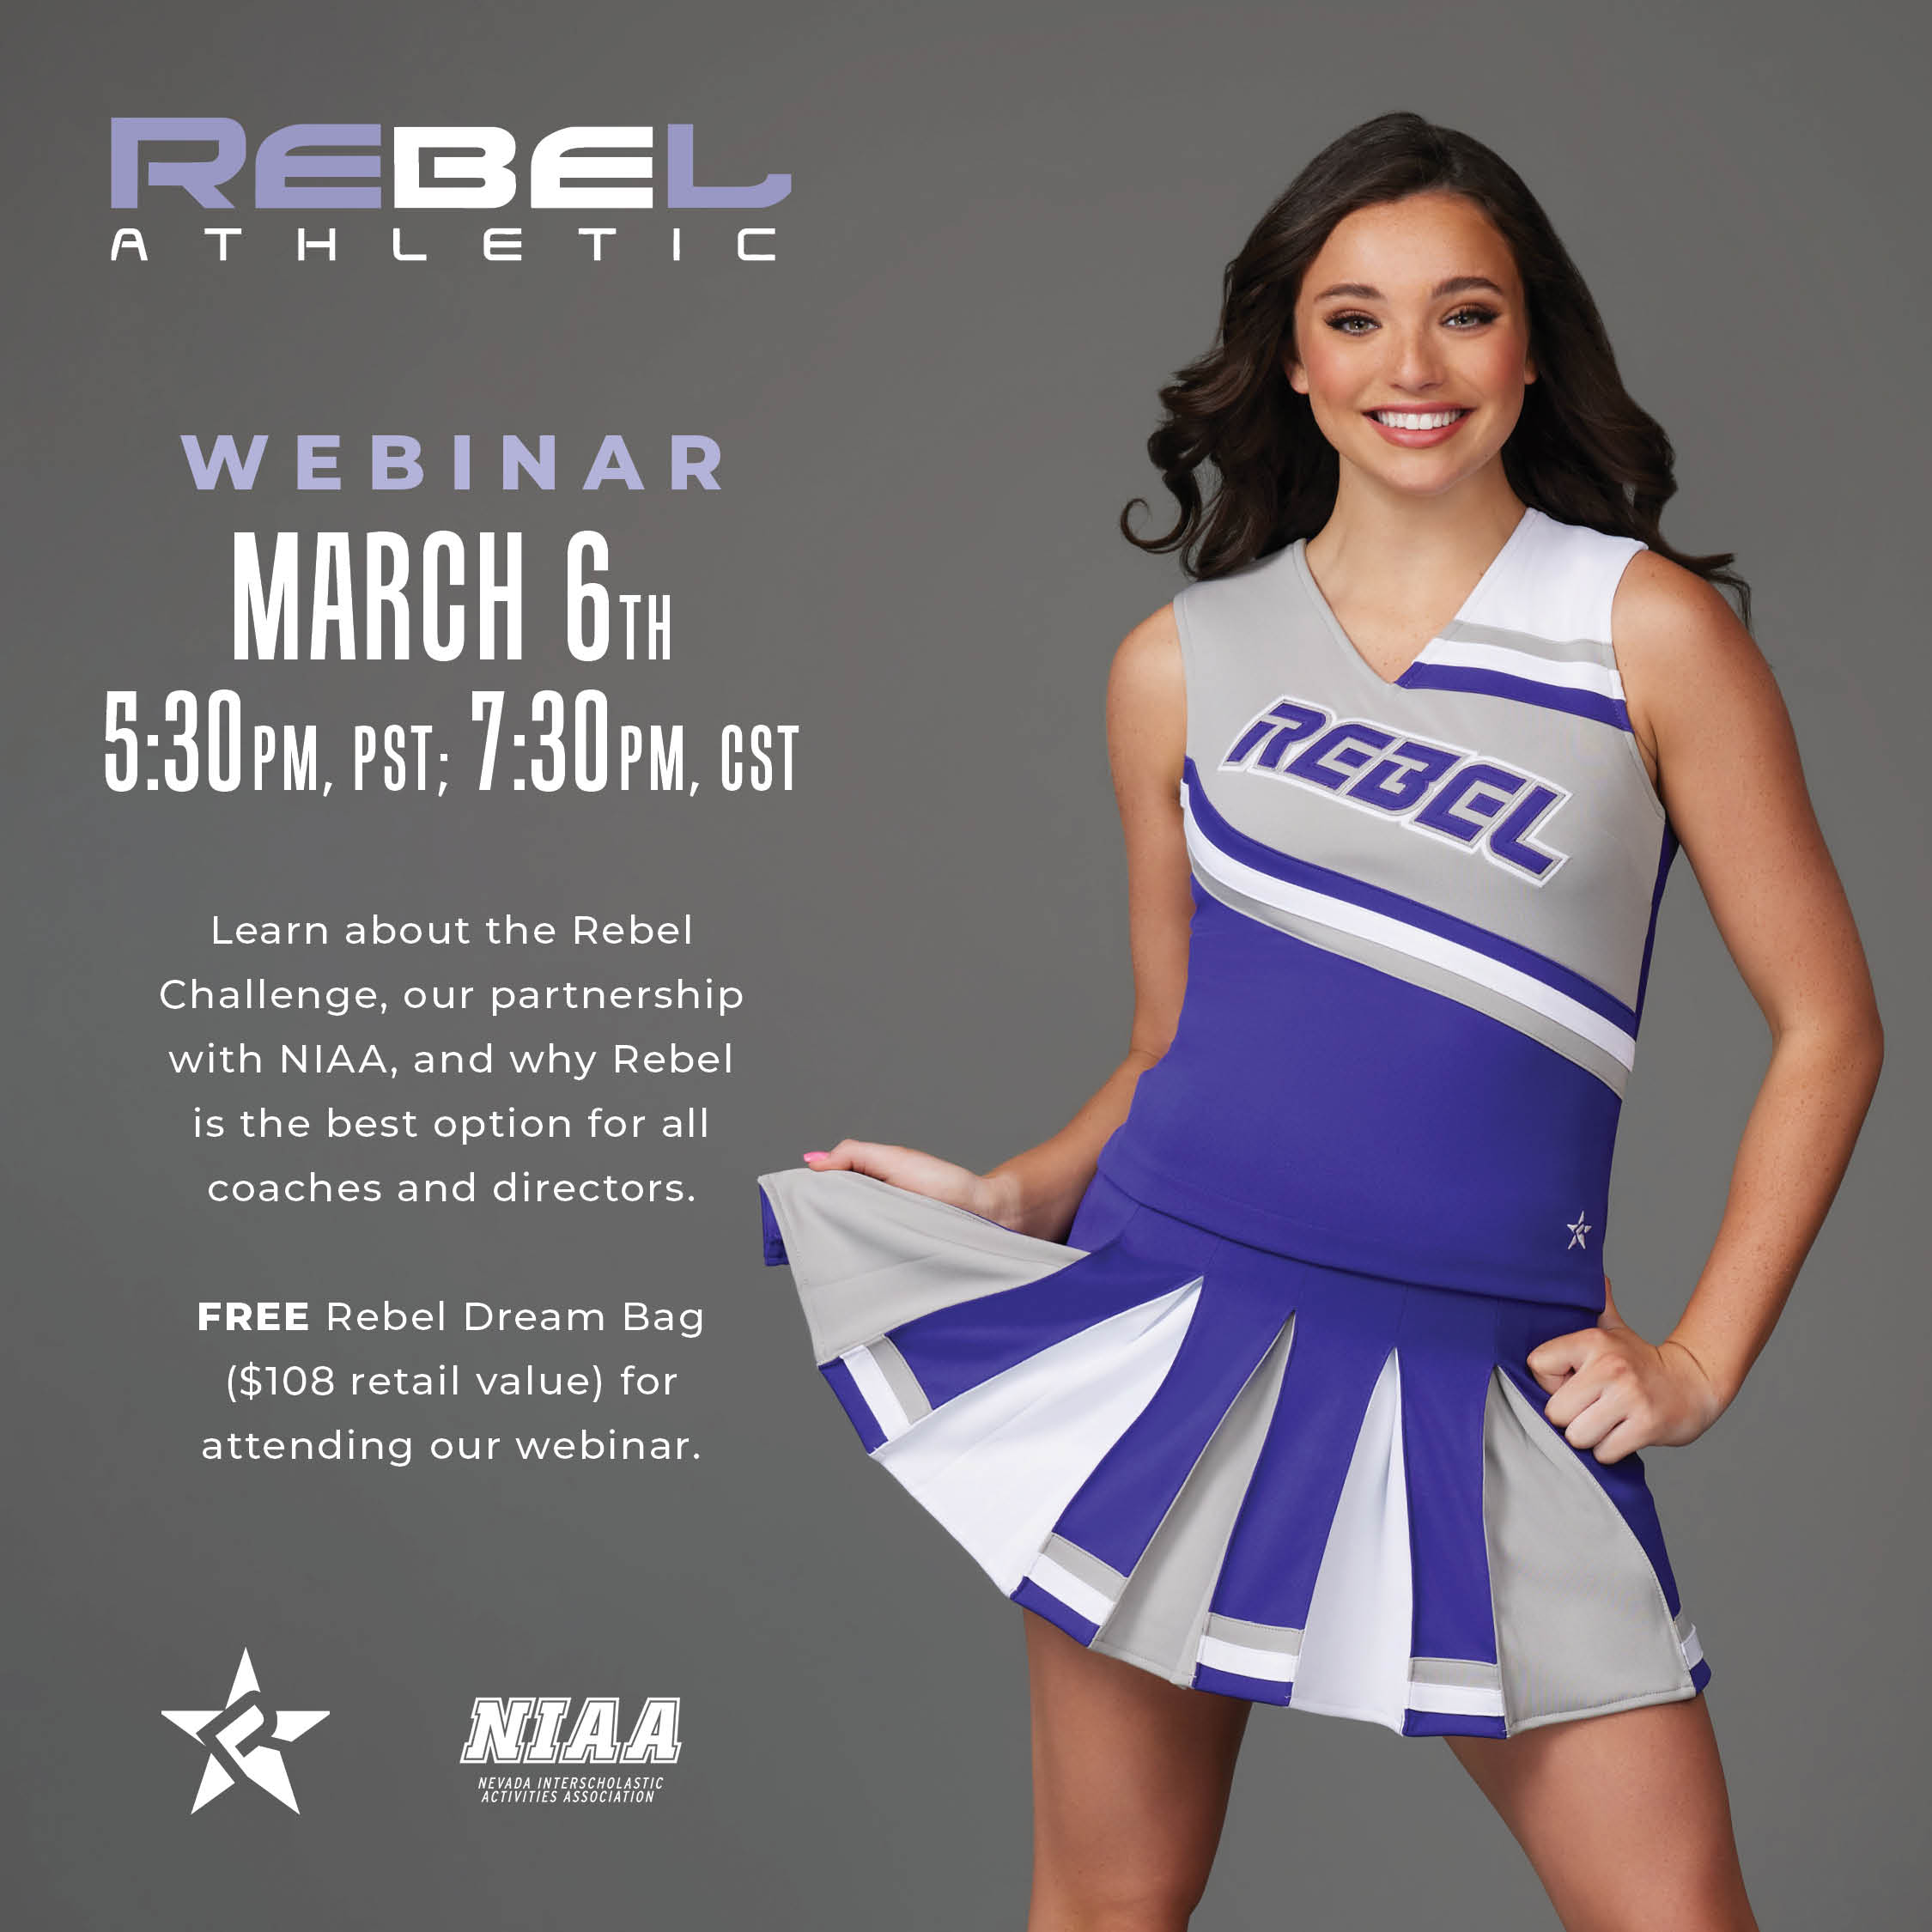 Nevada Interscholastic Activities Association on X: Please join our  partner Rebel Athletic for an informative webinar to learn about all things Rebel  Athletic! Attendees will receive a FREE Rebel Dream Bag (exclusions